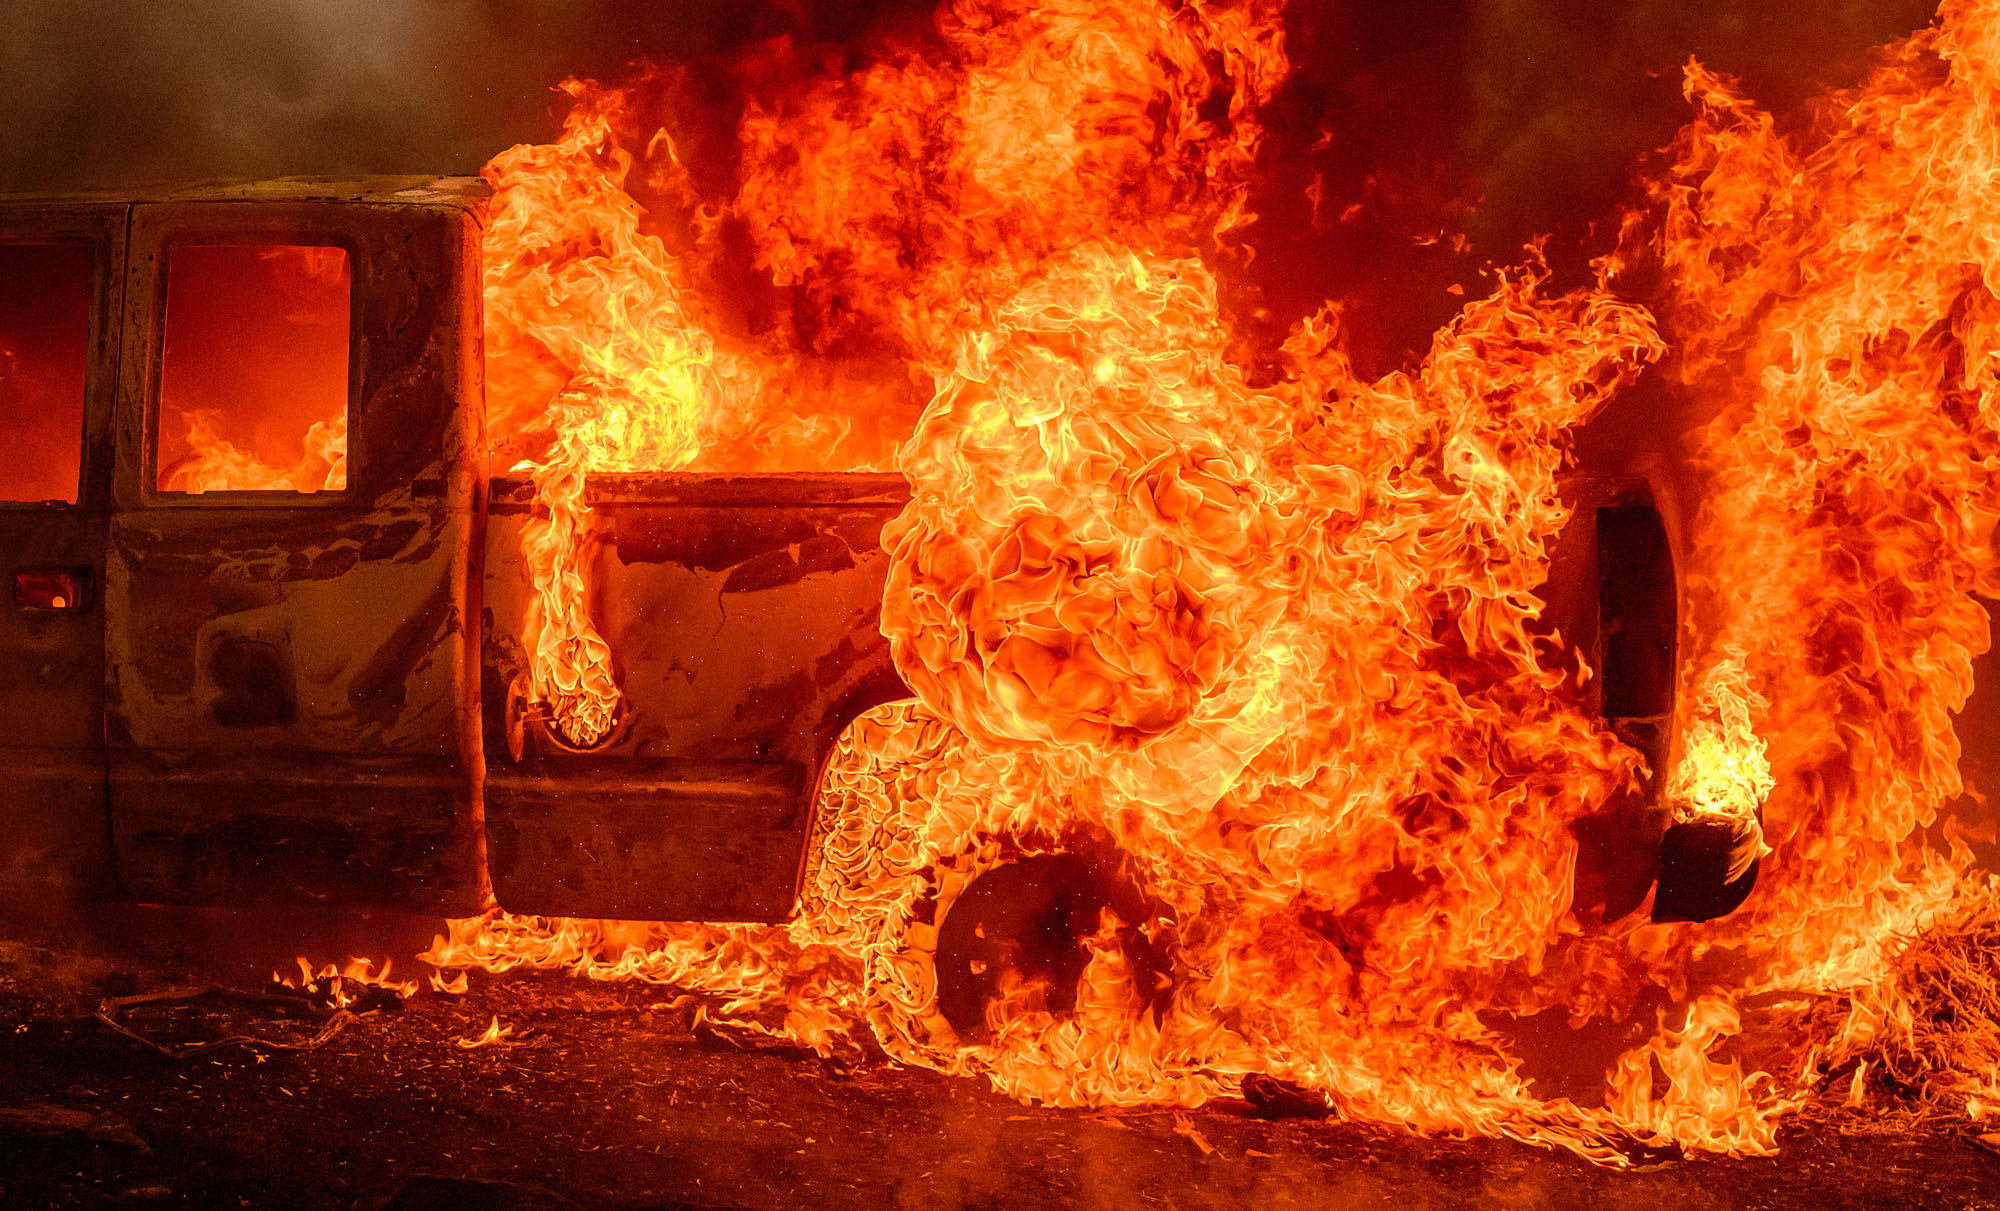 Flames engulf a vehicle during the Thompson Fire in Oroville, California.